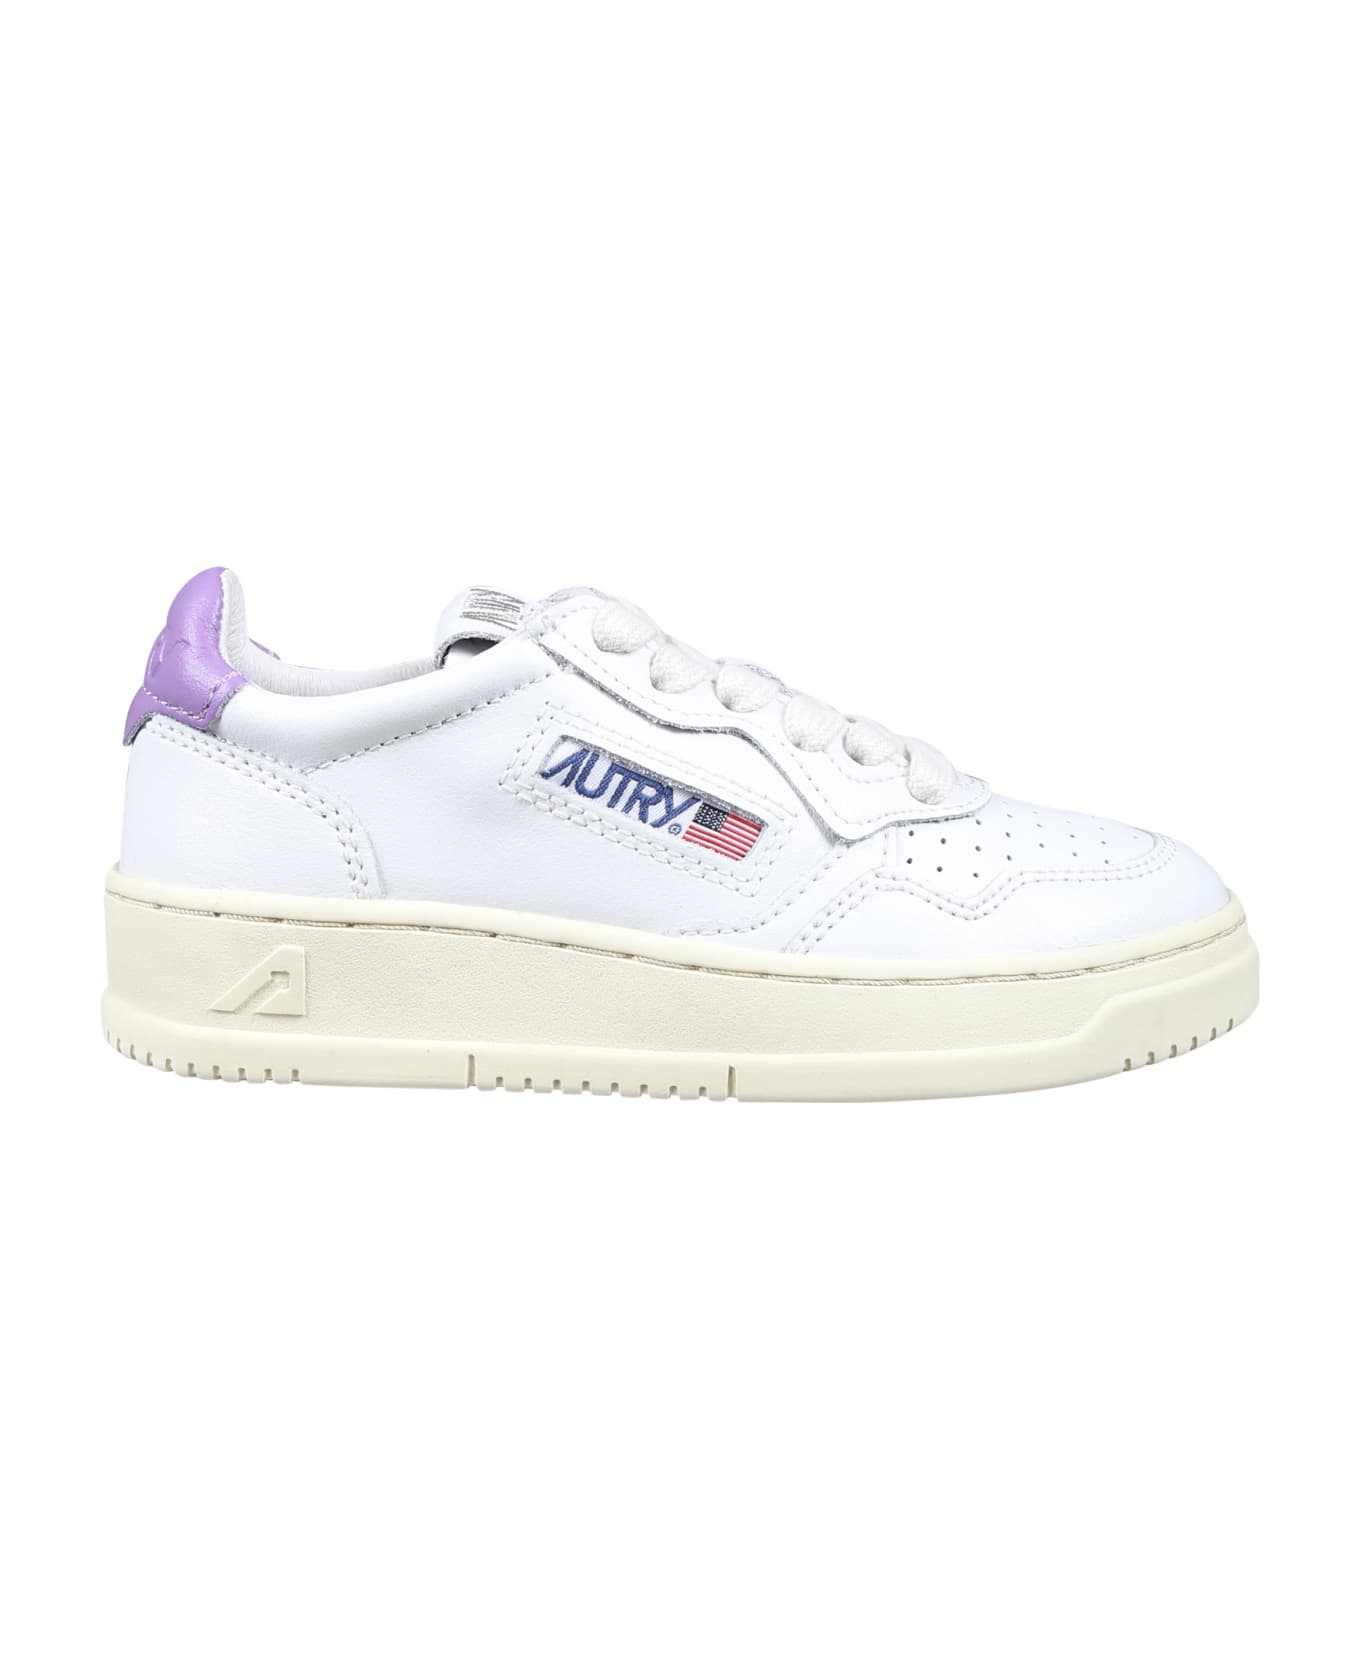 Autry Medalist Low Sneakers For Kids - White